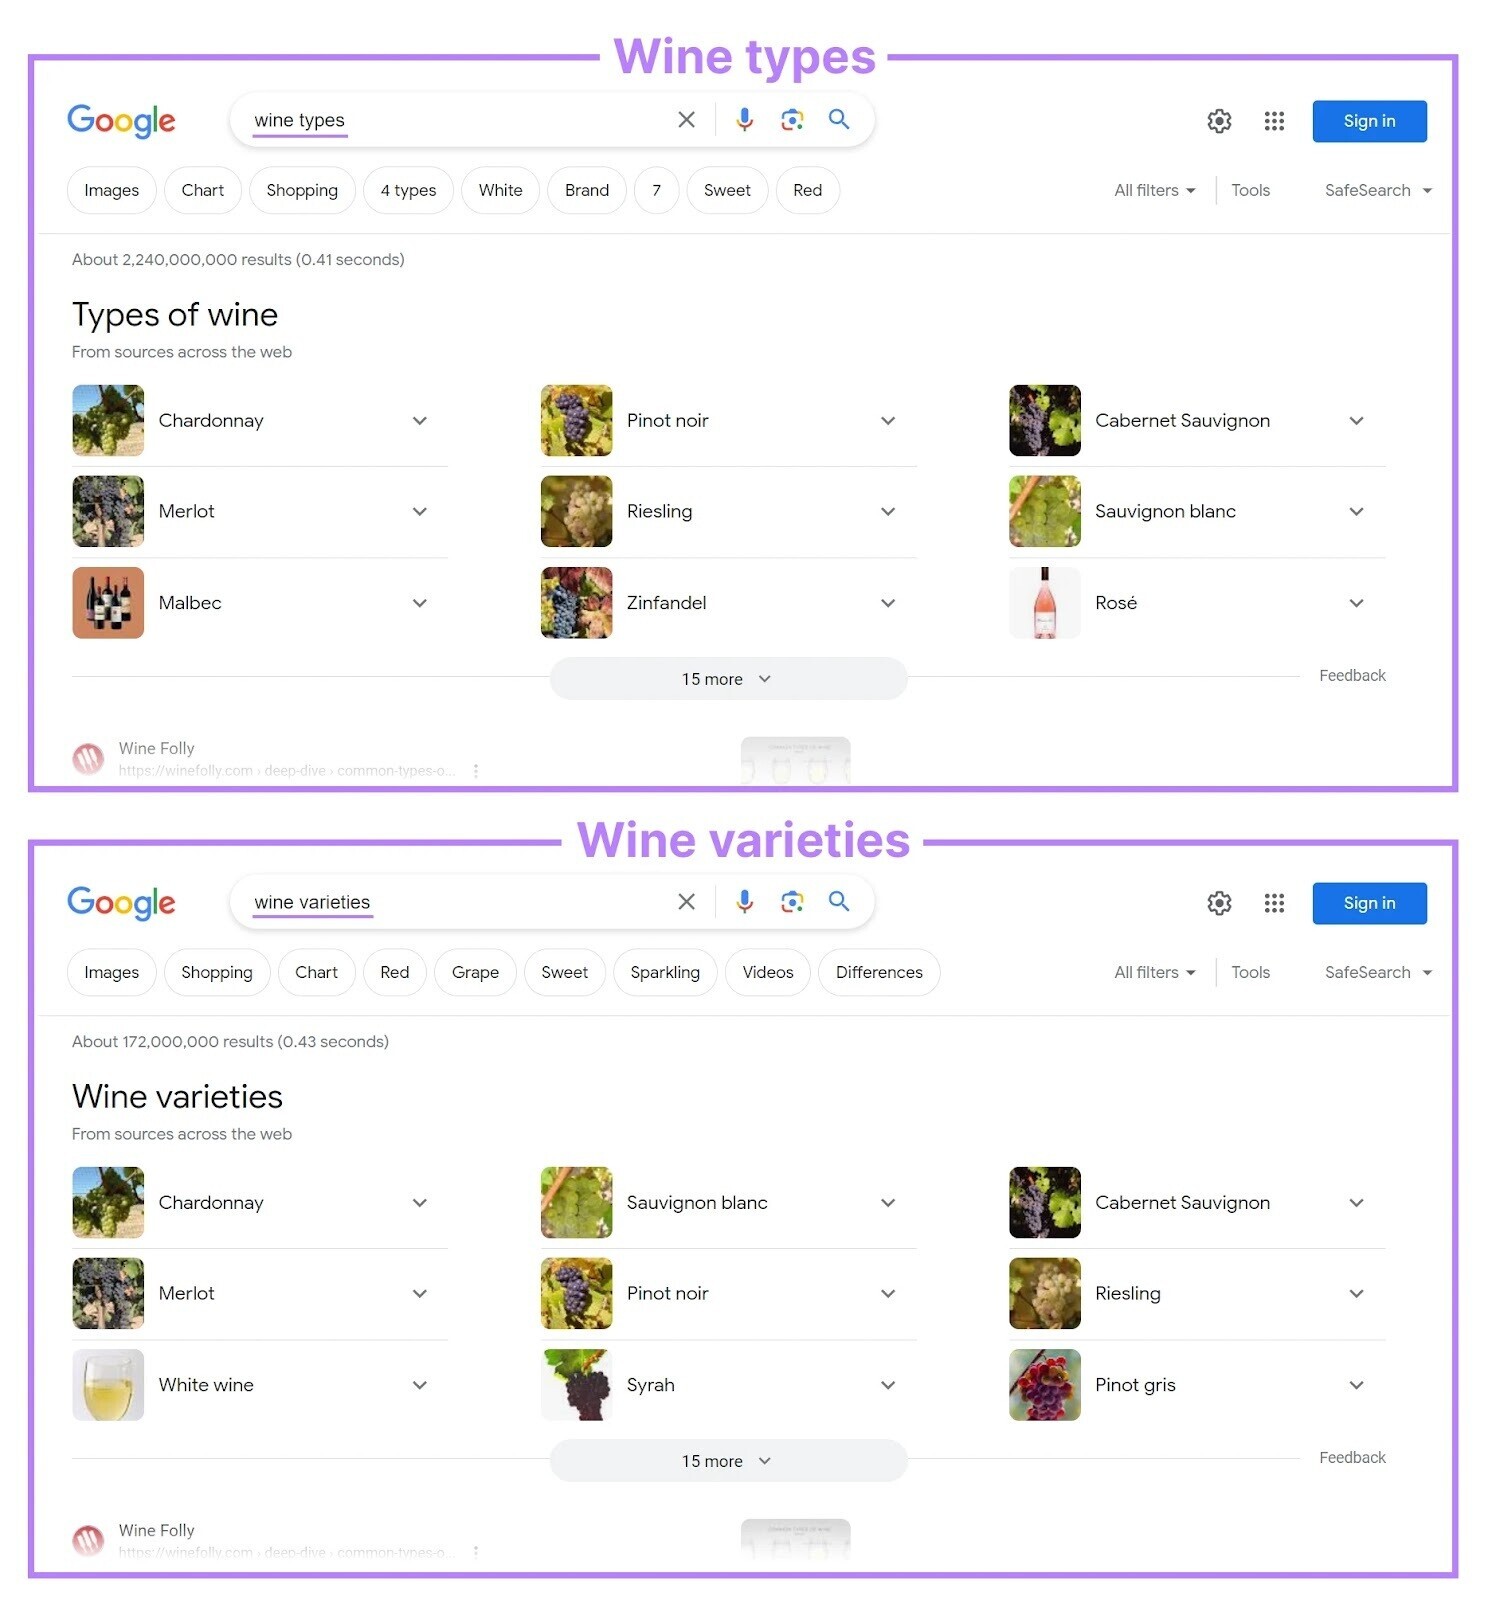 Google SERPs for “wine types” and “wine varieties”